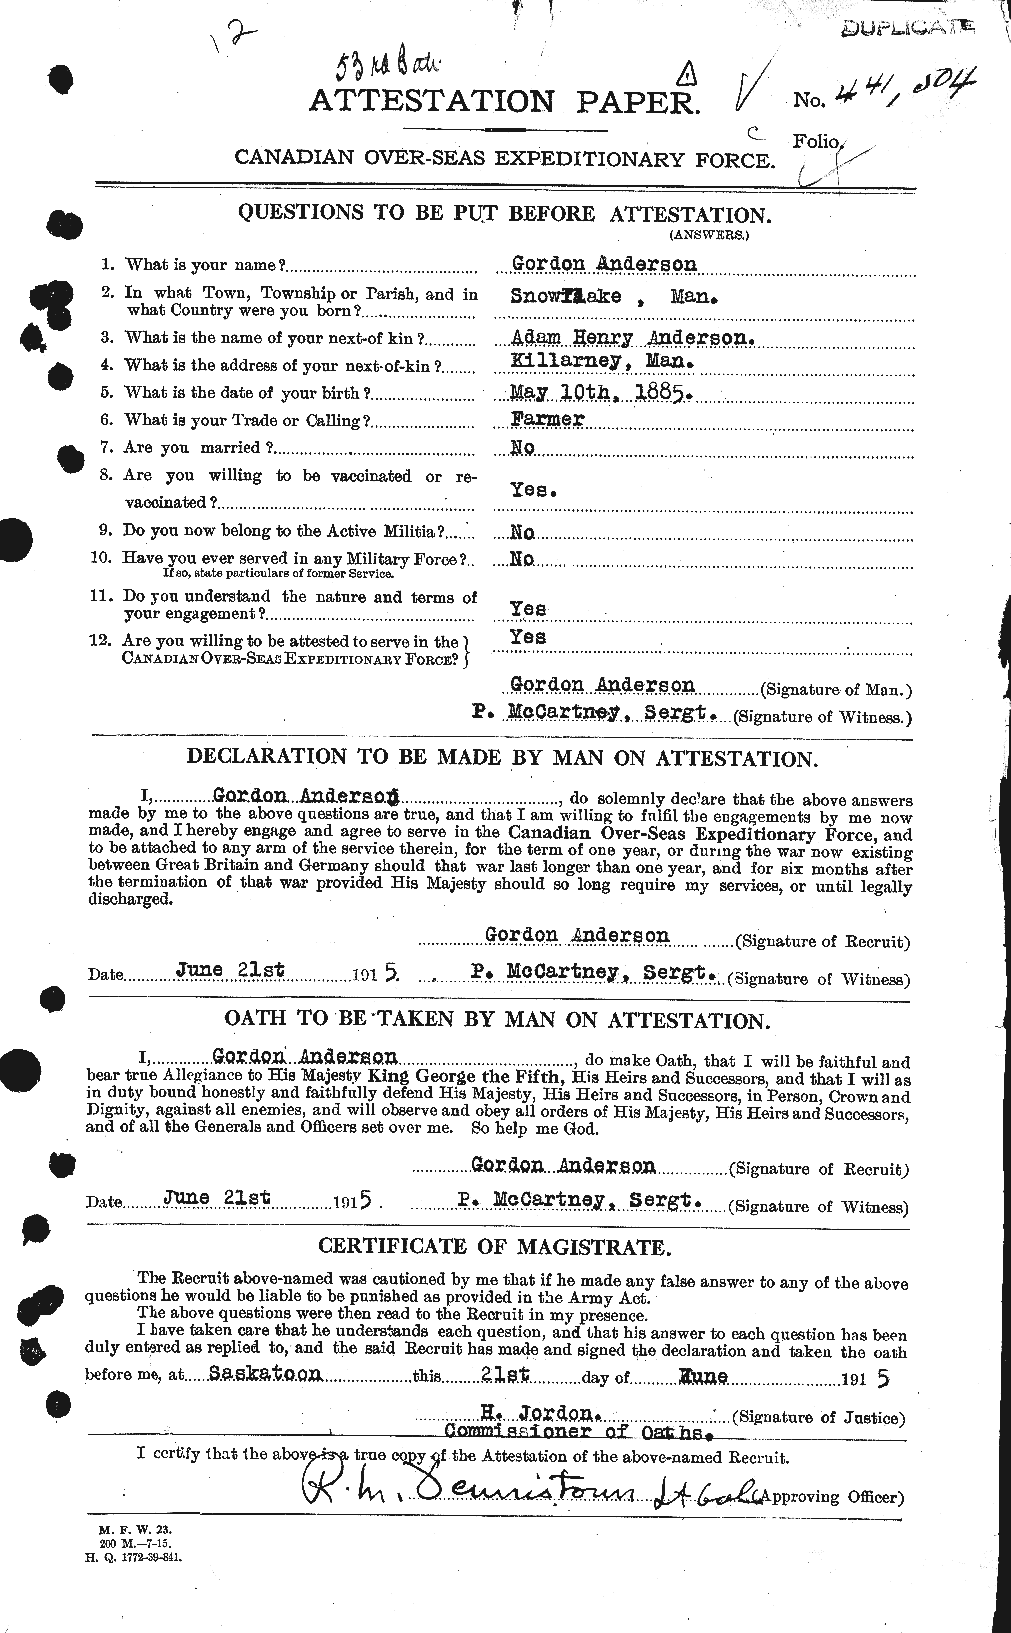 Personnel Records of the First World War - CEF 209671a